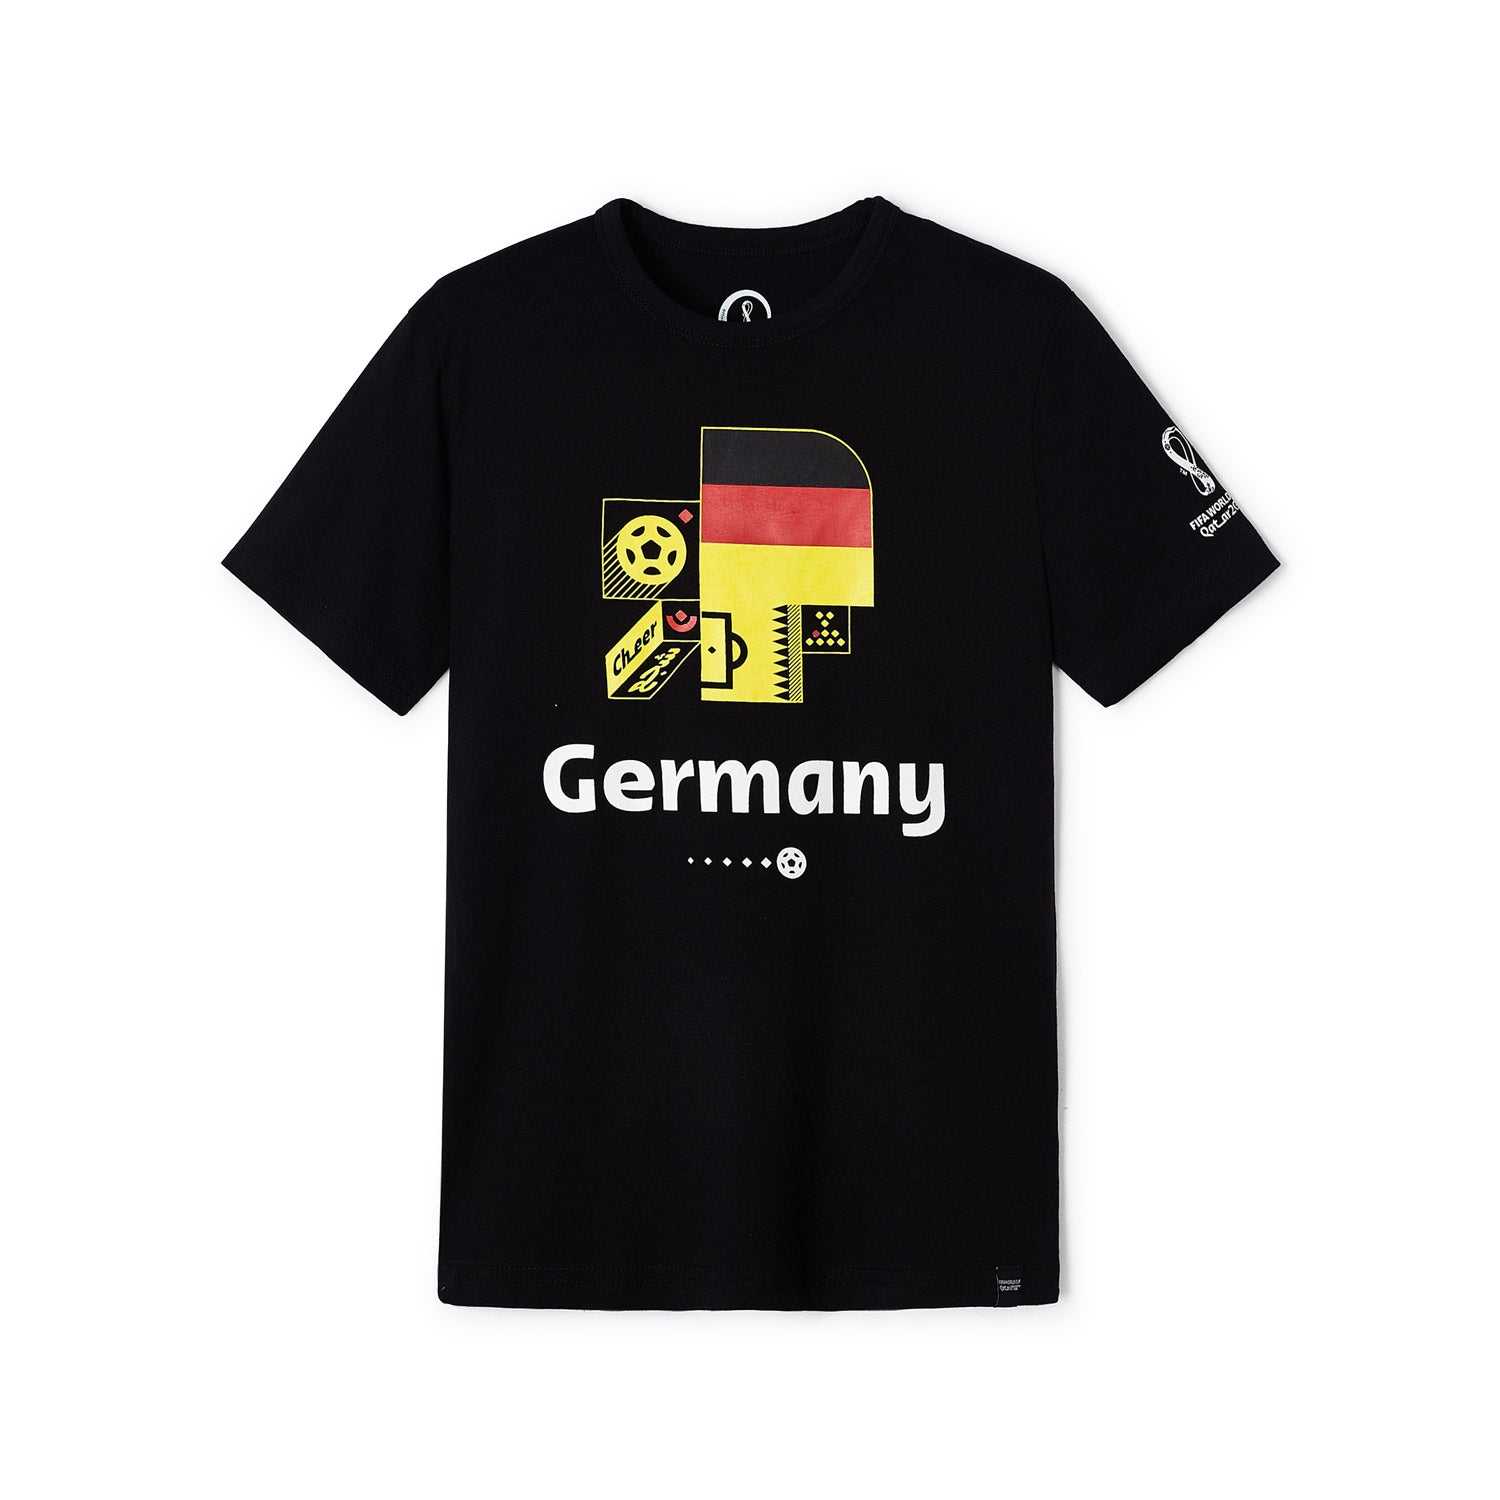 2022 World Cup Germany Black Graphic T-Shirt - Youth